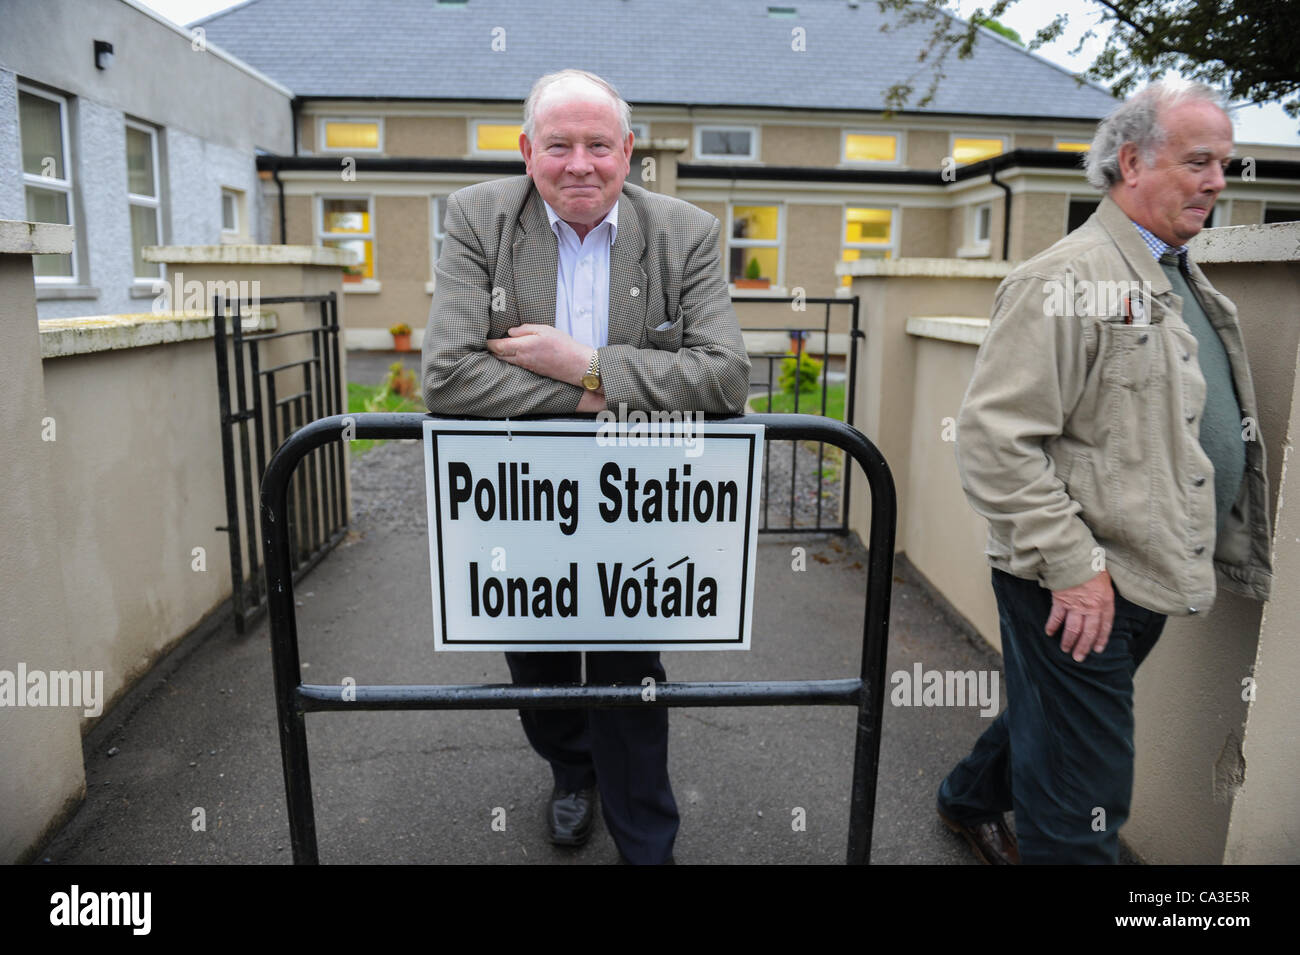 31st May, 2012. Voting gets underway in Ireland on the referendum on the Fiscal Treaty (Referendum on the 30th amendment to the Constitution (Treaty on Stability, Coordination and Governance in the Economic and Monetary Union) Bill 2012 in Gibbstown National School, Navan, County Meath, Ireland. Pic Stock Photo